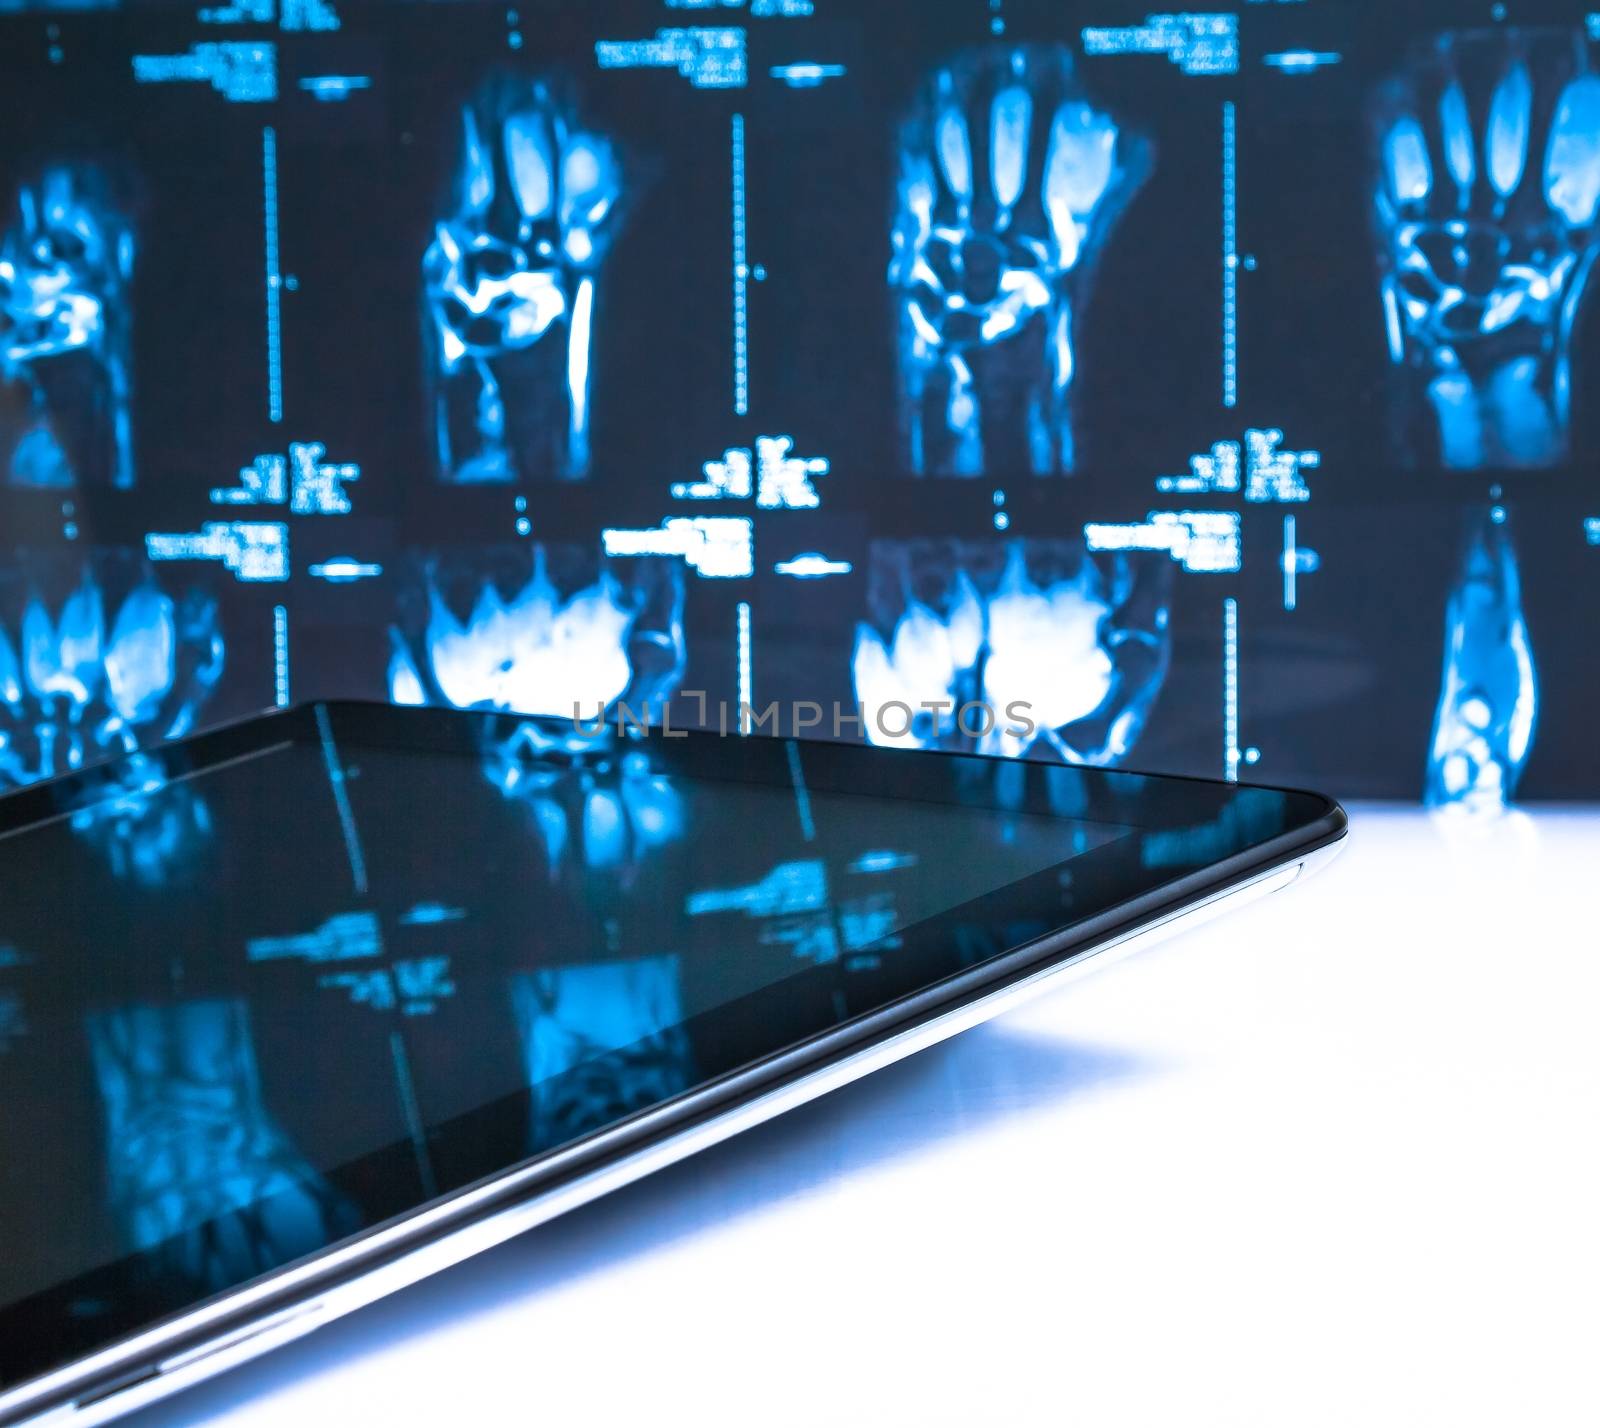 modern digital tablet pc in laboratory on x-ray images background. concept of medical or research theme